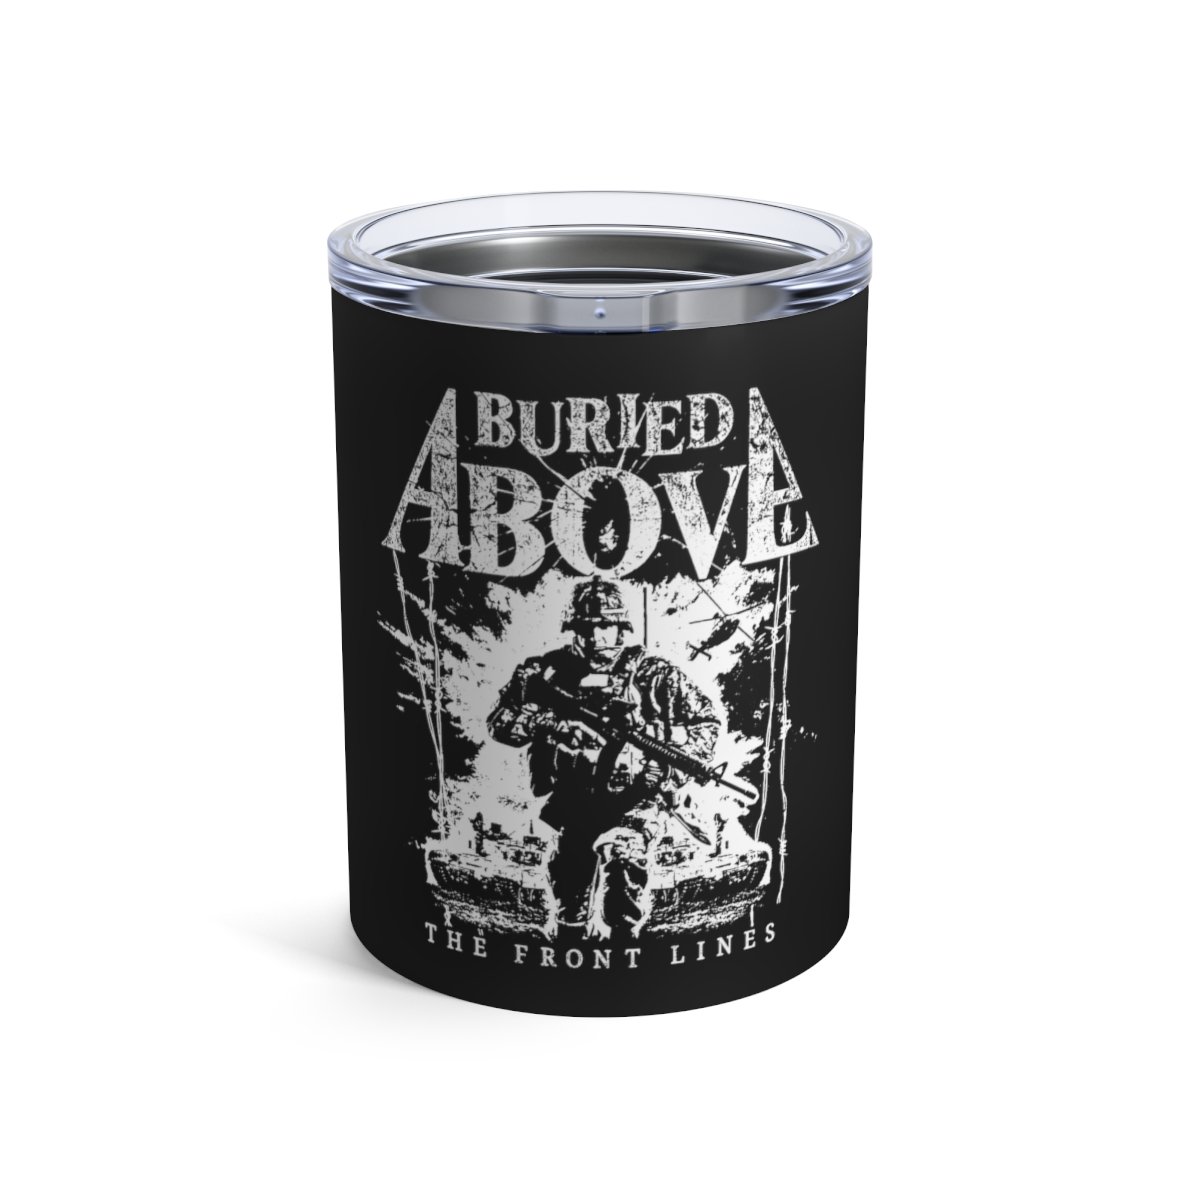 Buried Above – The Front Lines Tumbler 10oz